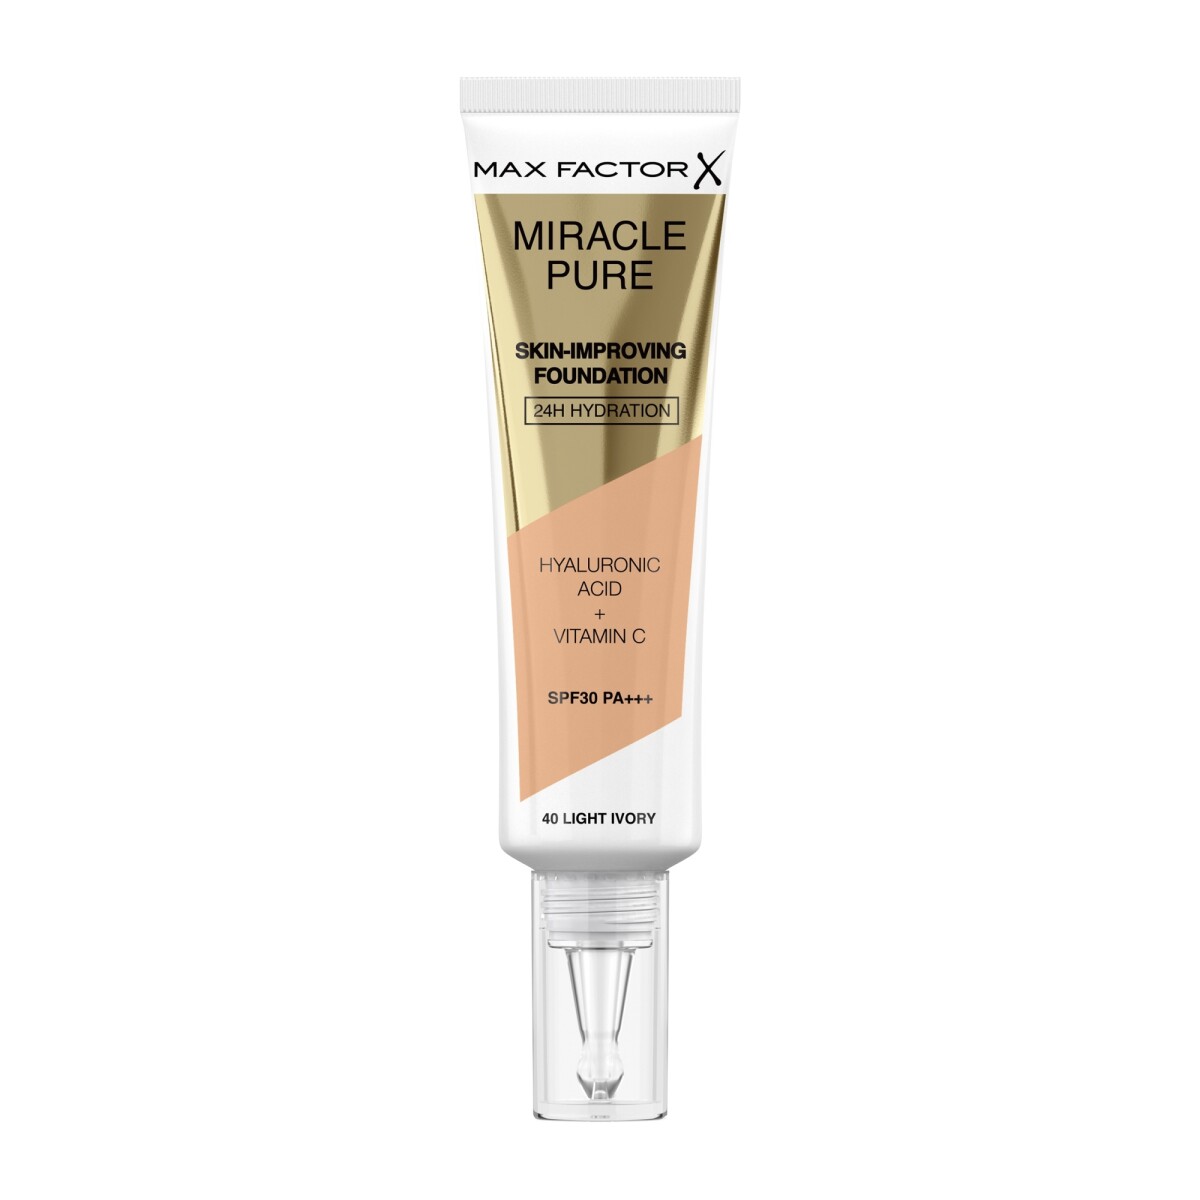 Mf Miracle Pure Foundat Ligth Ivory 40 